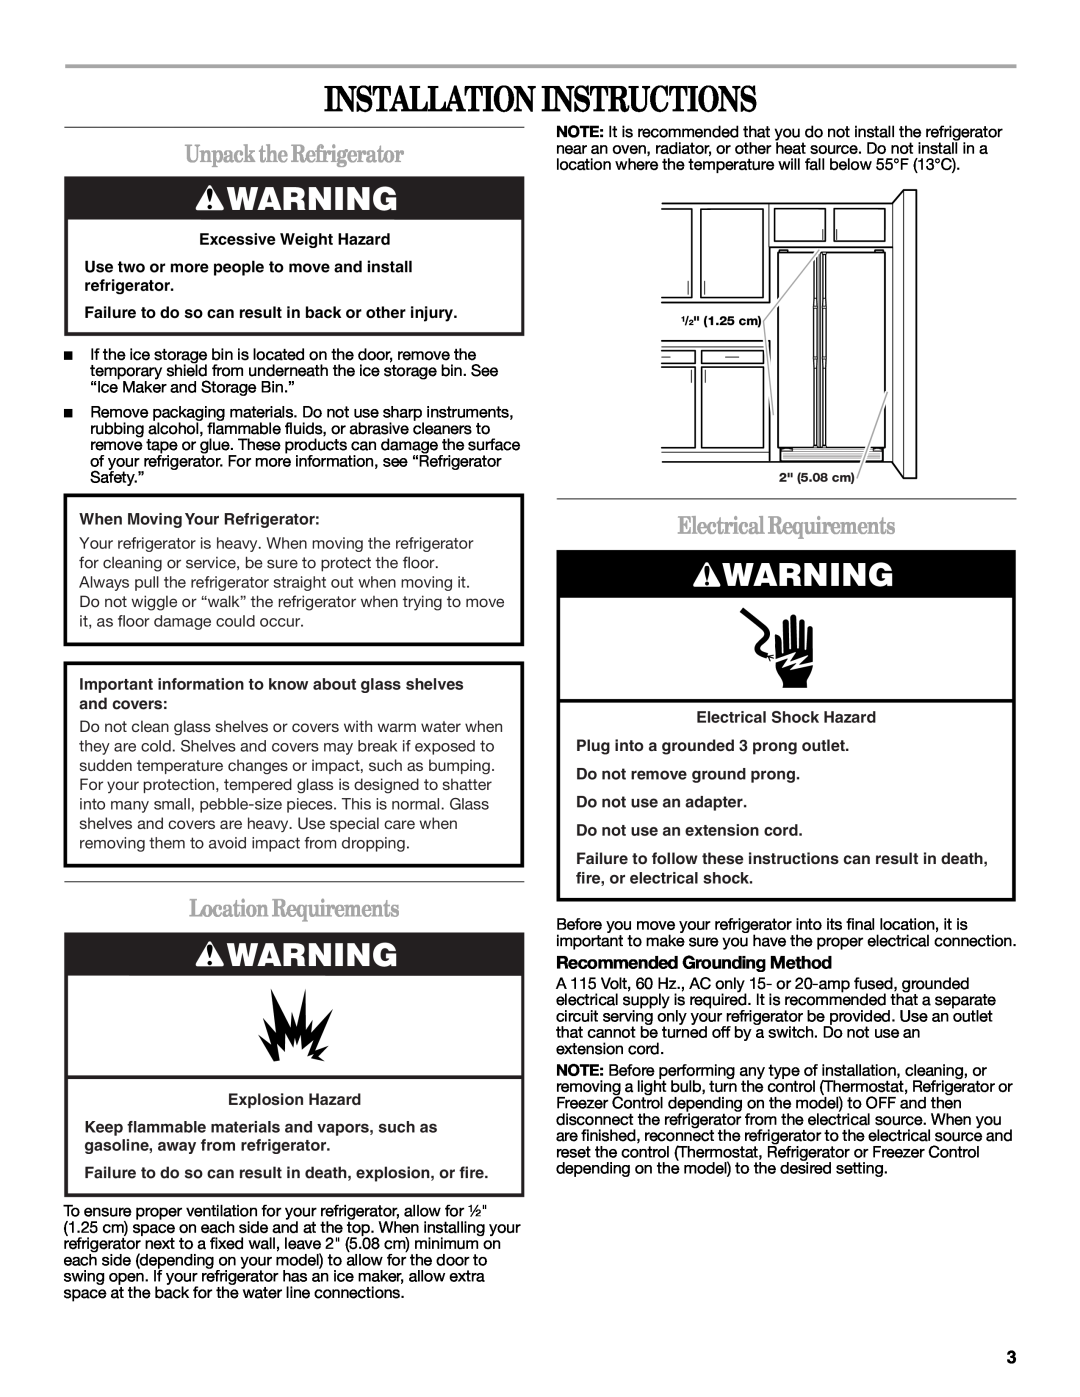 Whirlpool ED2NHGXMT10 Installation Instructions, UnpacktheRefrigerator, LocationRequirements, Electrical Requirements 